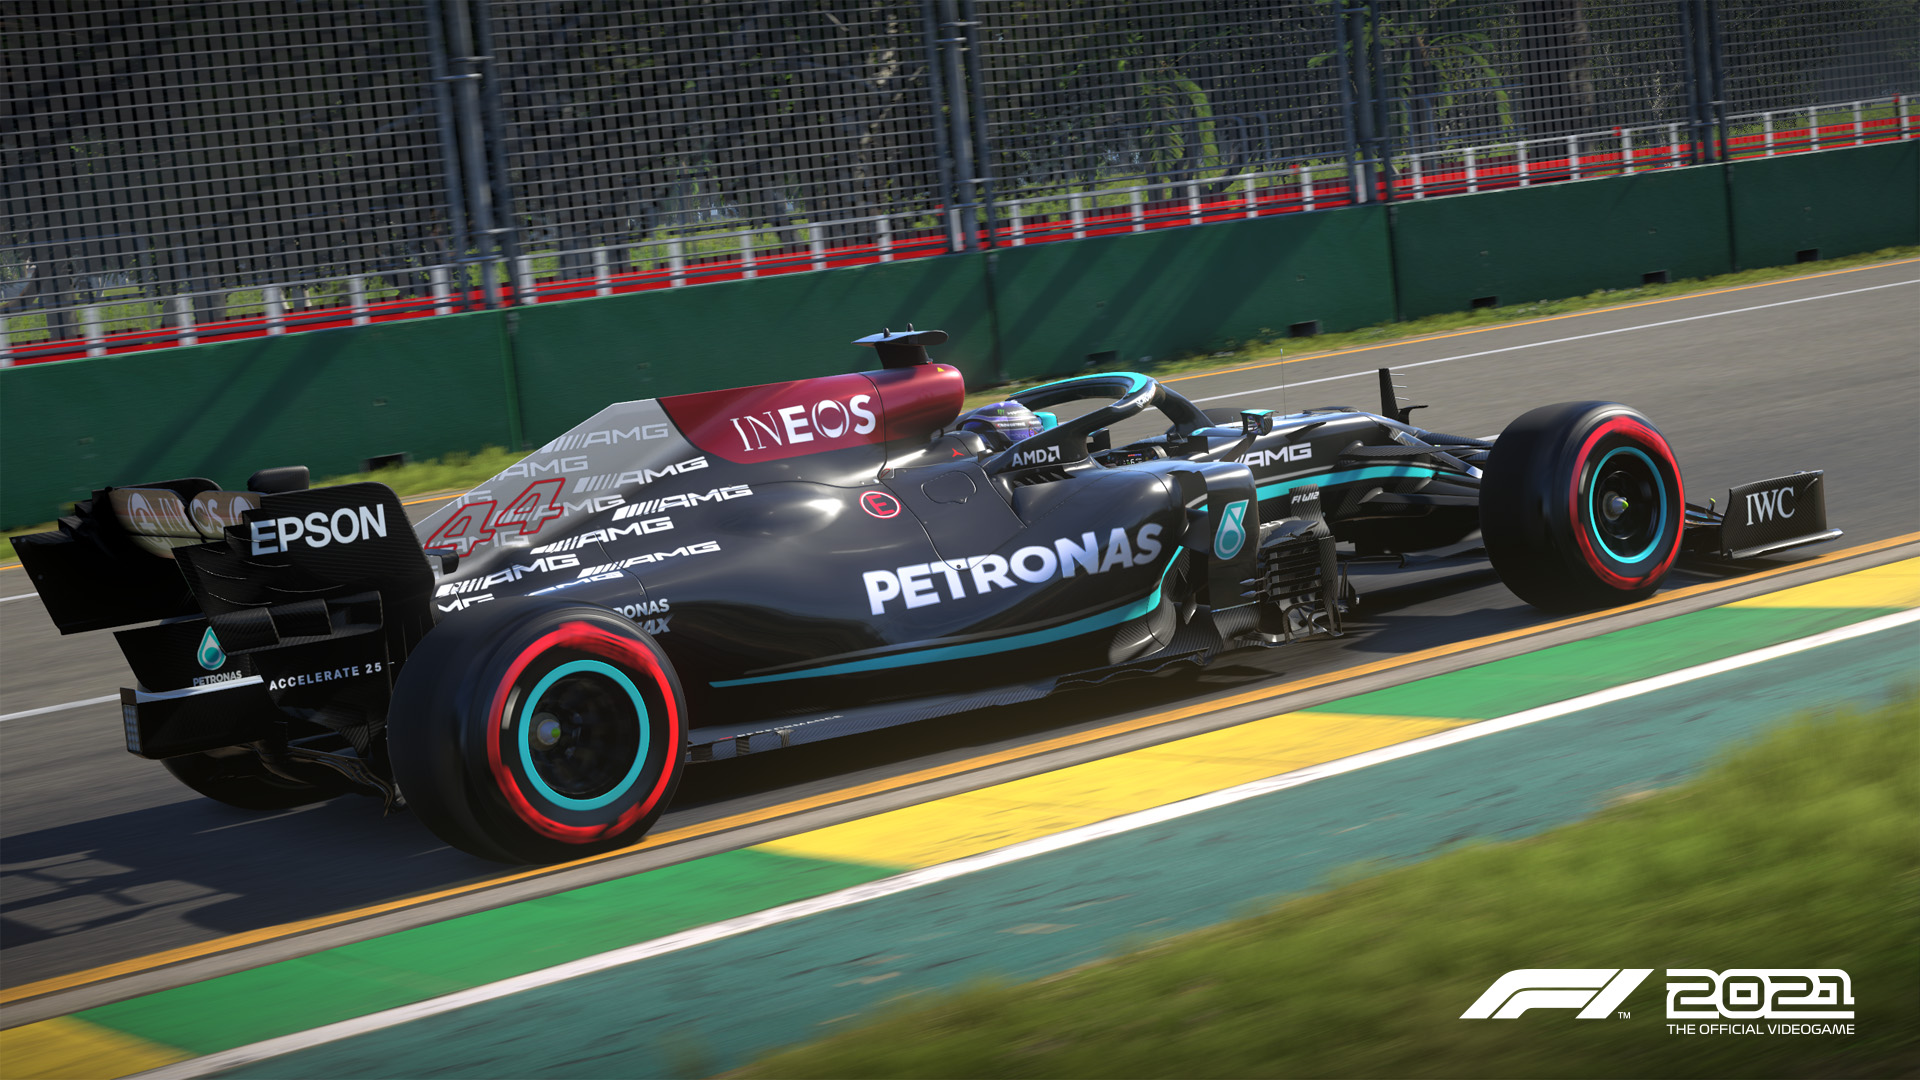 F1 2021 gets Portuguese Grand Prix course free, two others coming soon